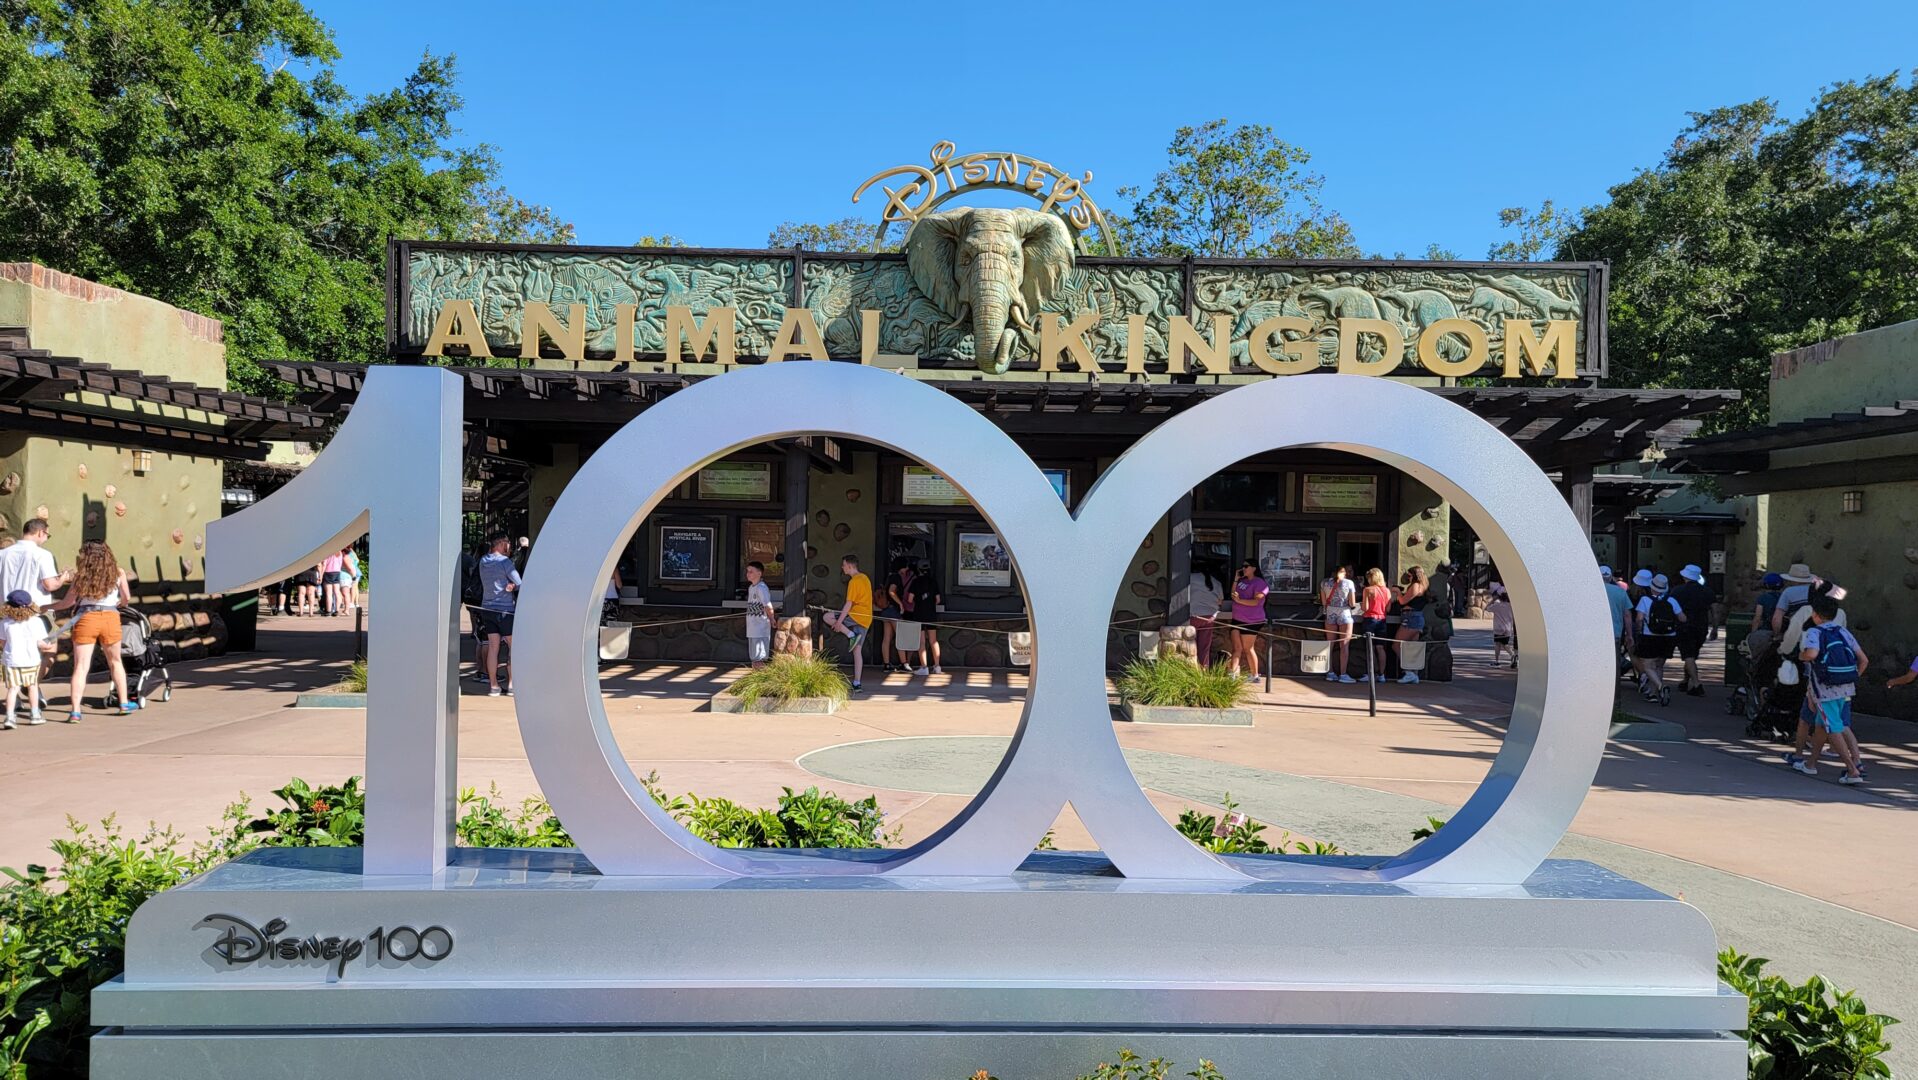 New Disney100 Decorations Now on Display in the Animal Kingdom